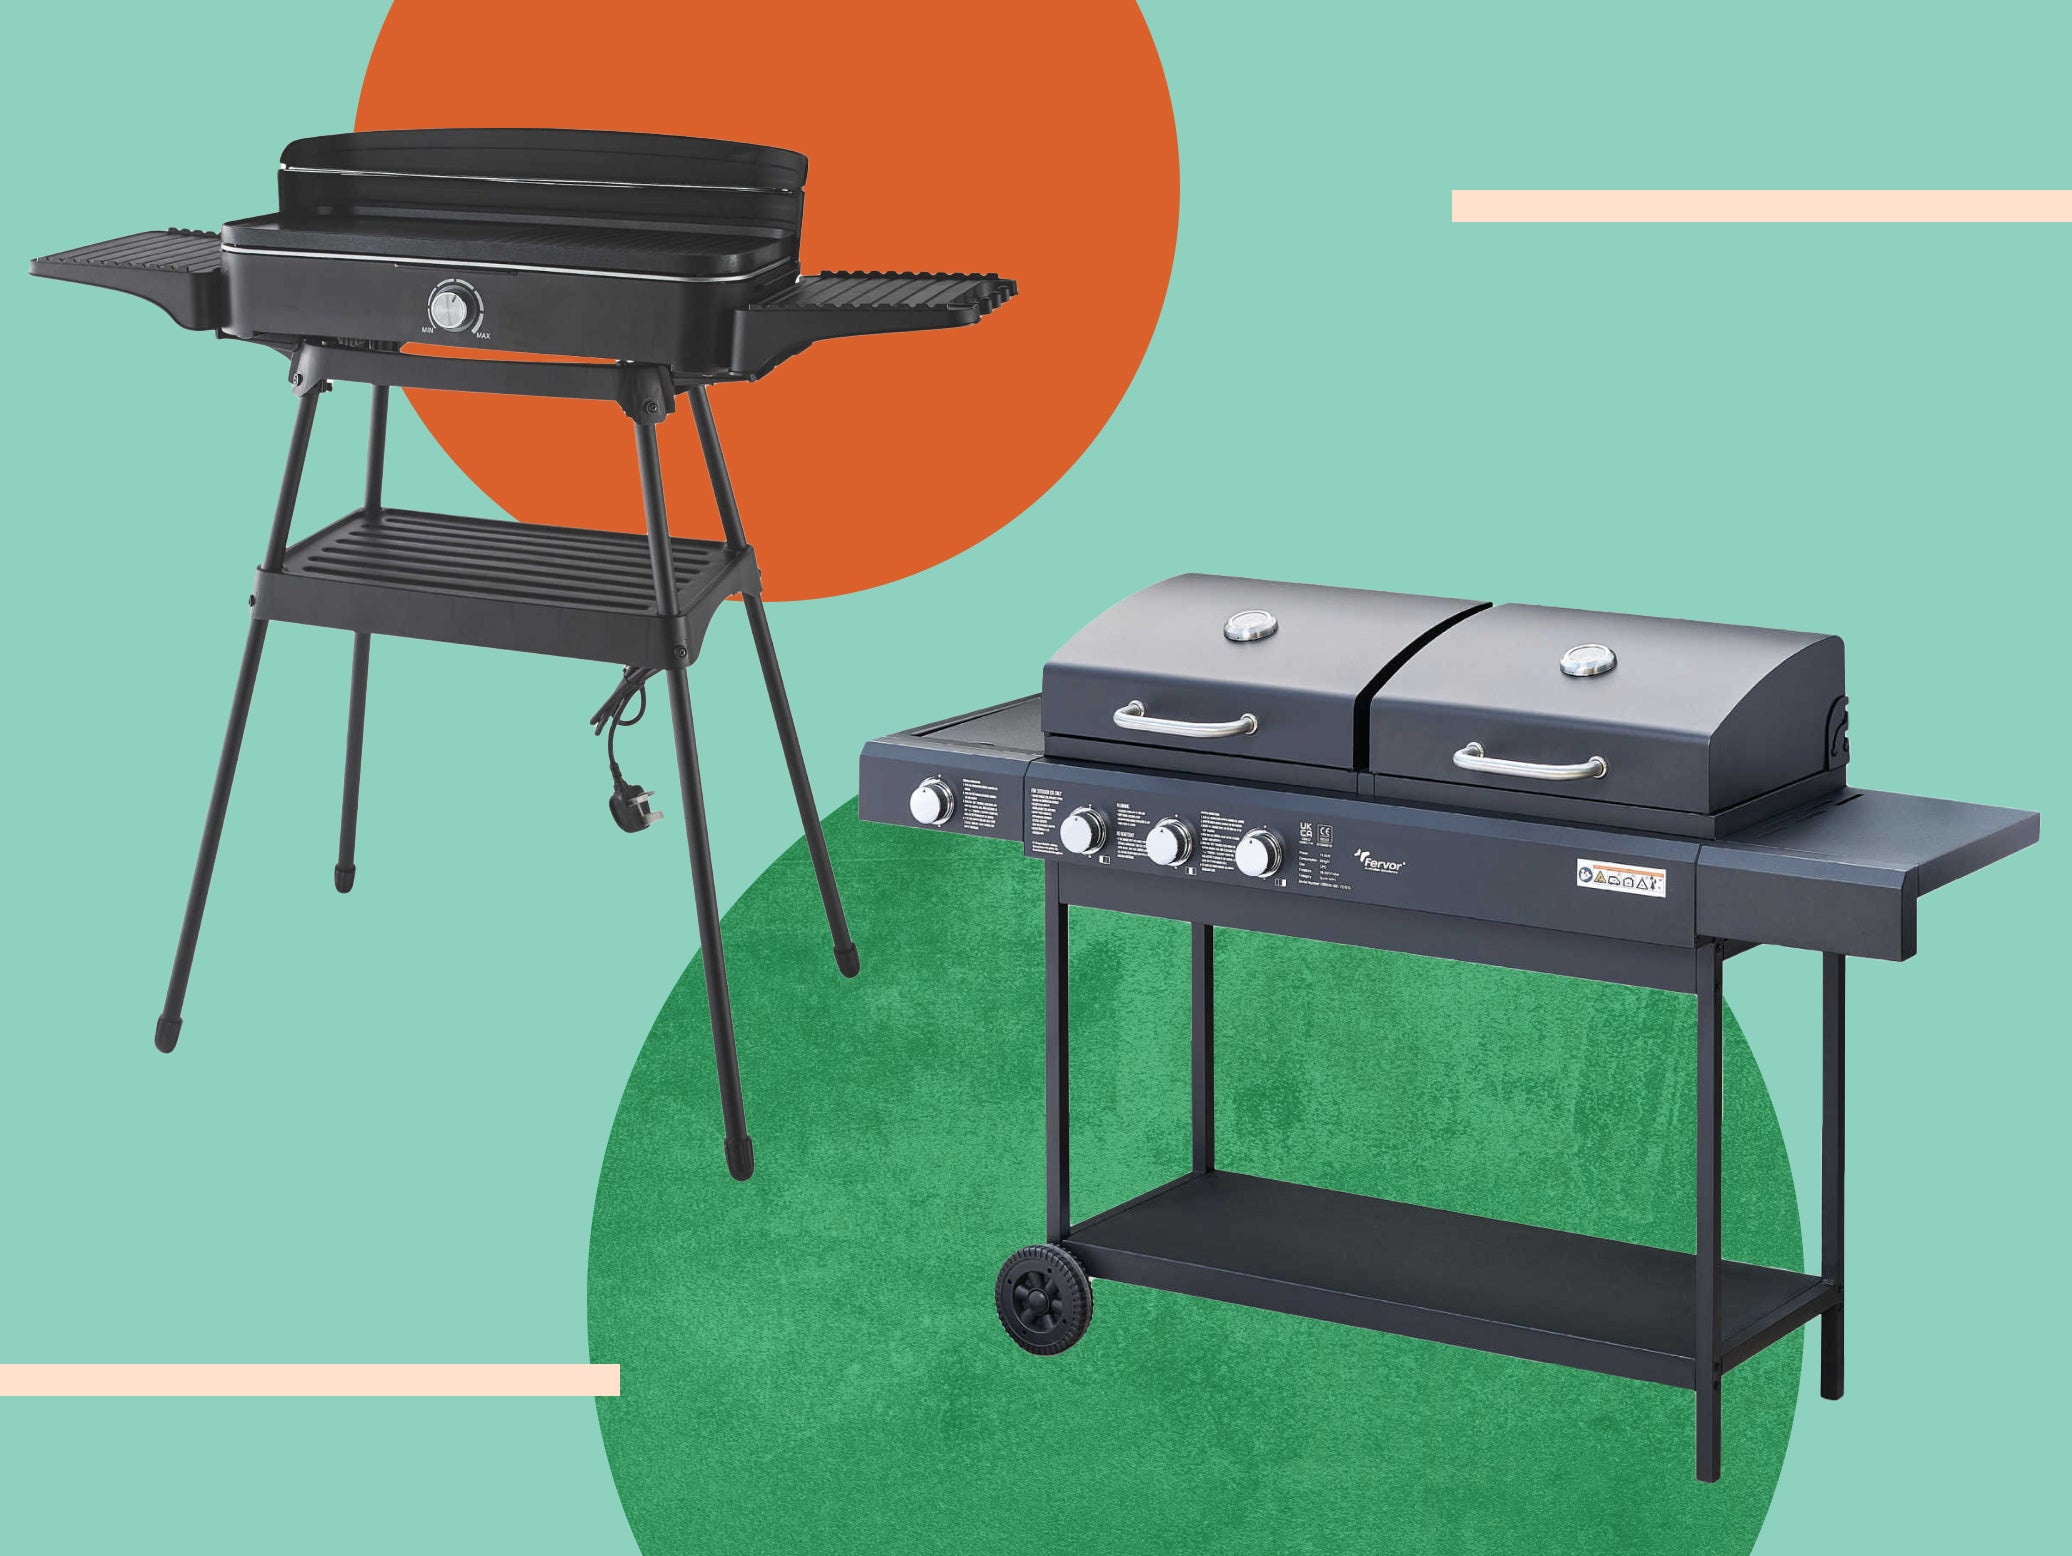 The outdoor cooking range starts from £39.99